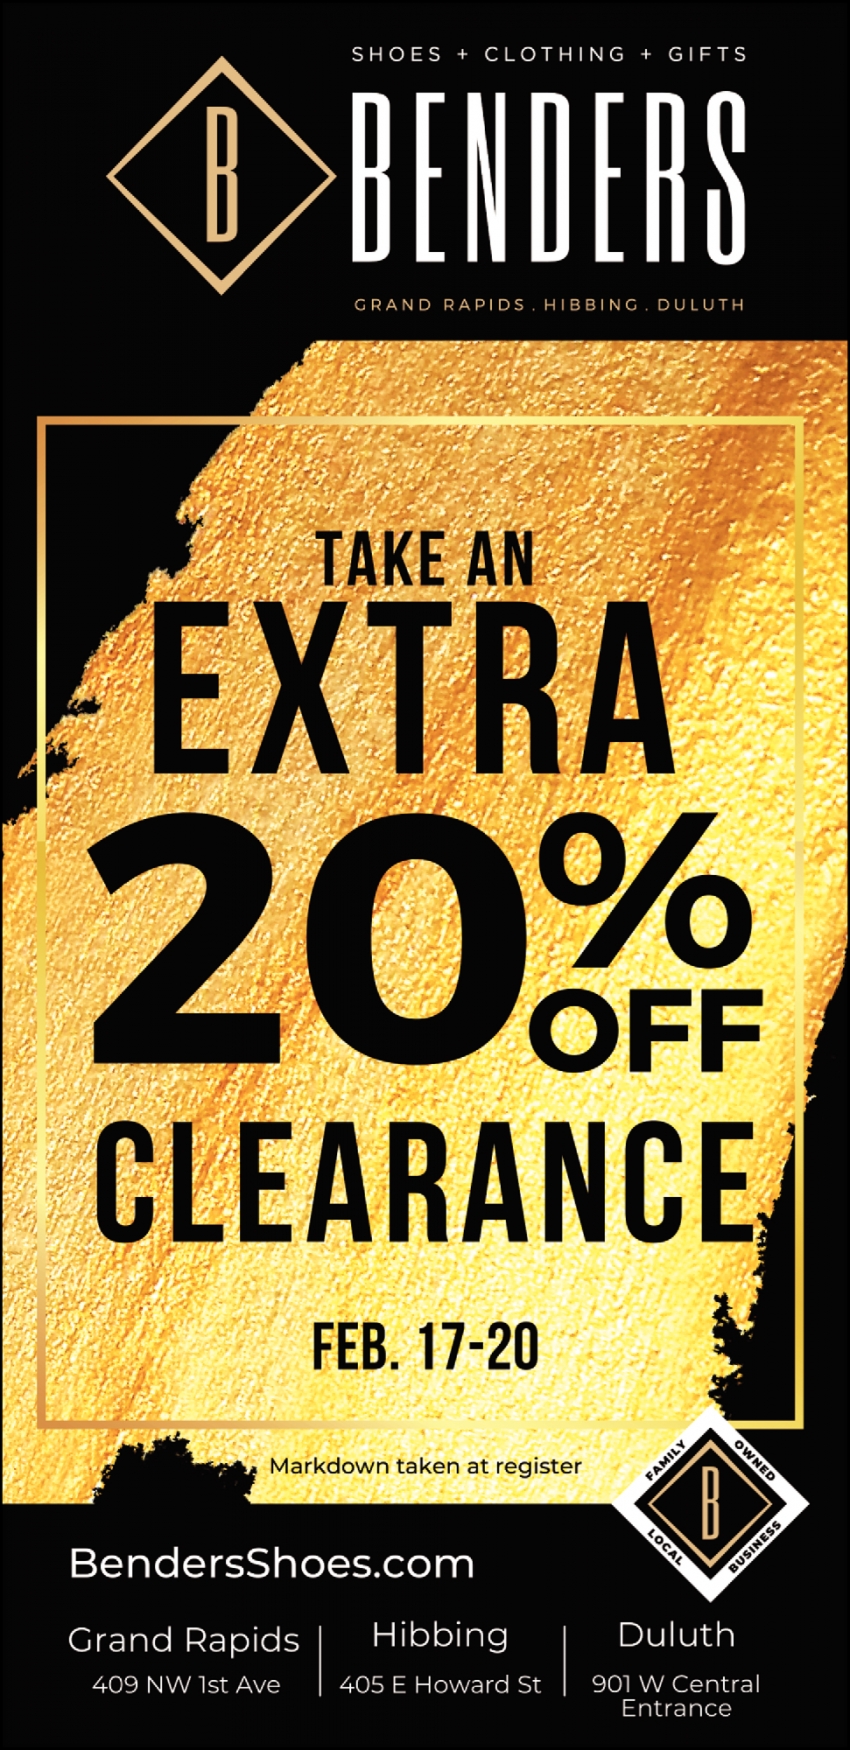 Tkae An Extra 20% Off Clearance